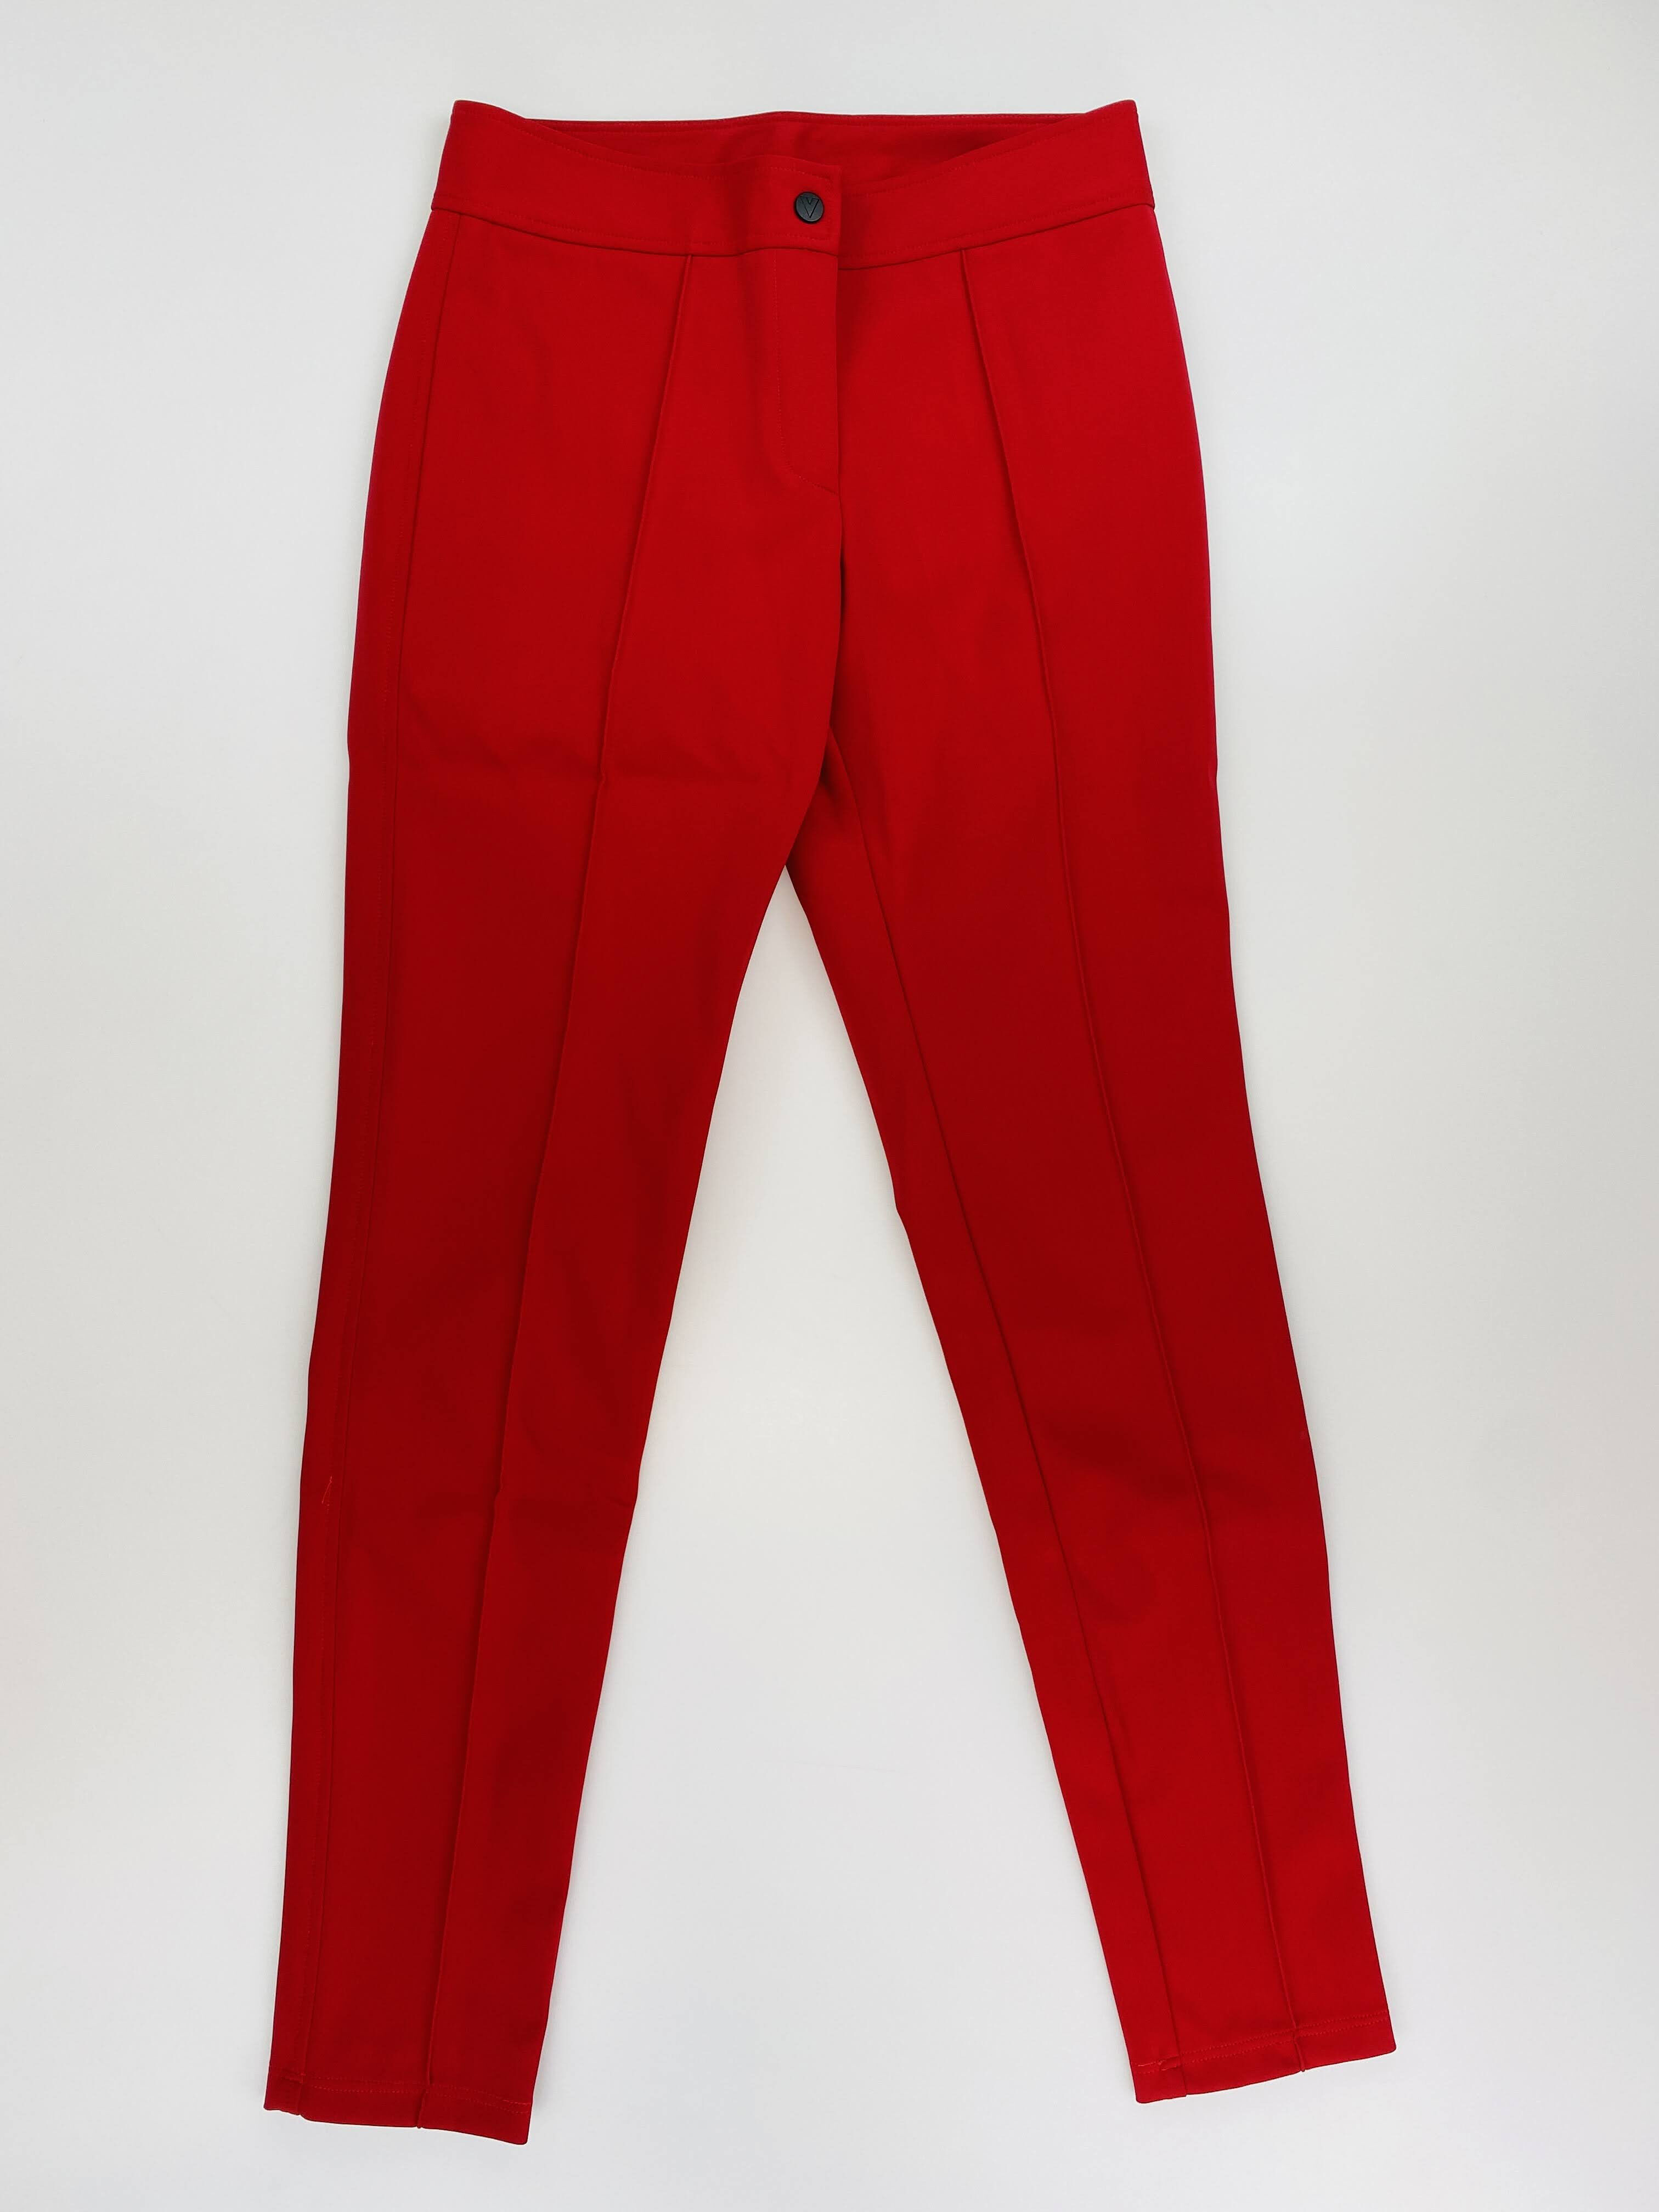 Vuarnet W'S Edith Pant - Second Hand Ski trousers - Women's - Red - S | Hardloop